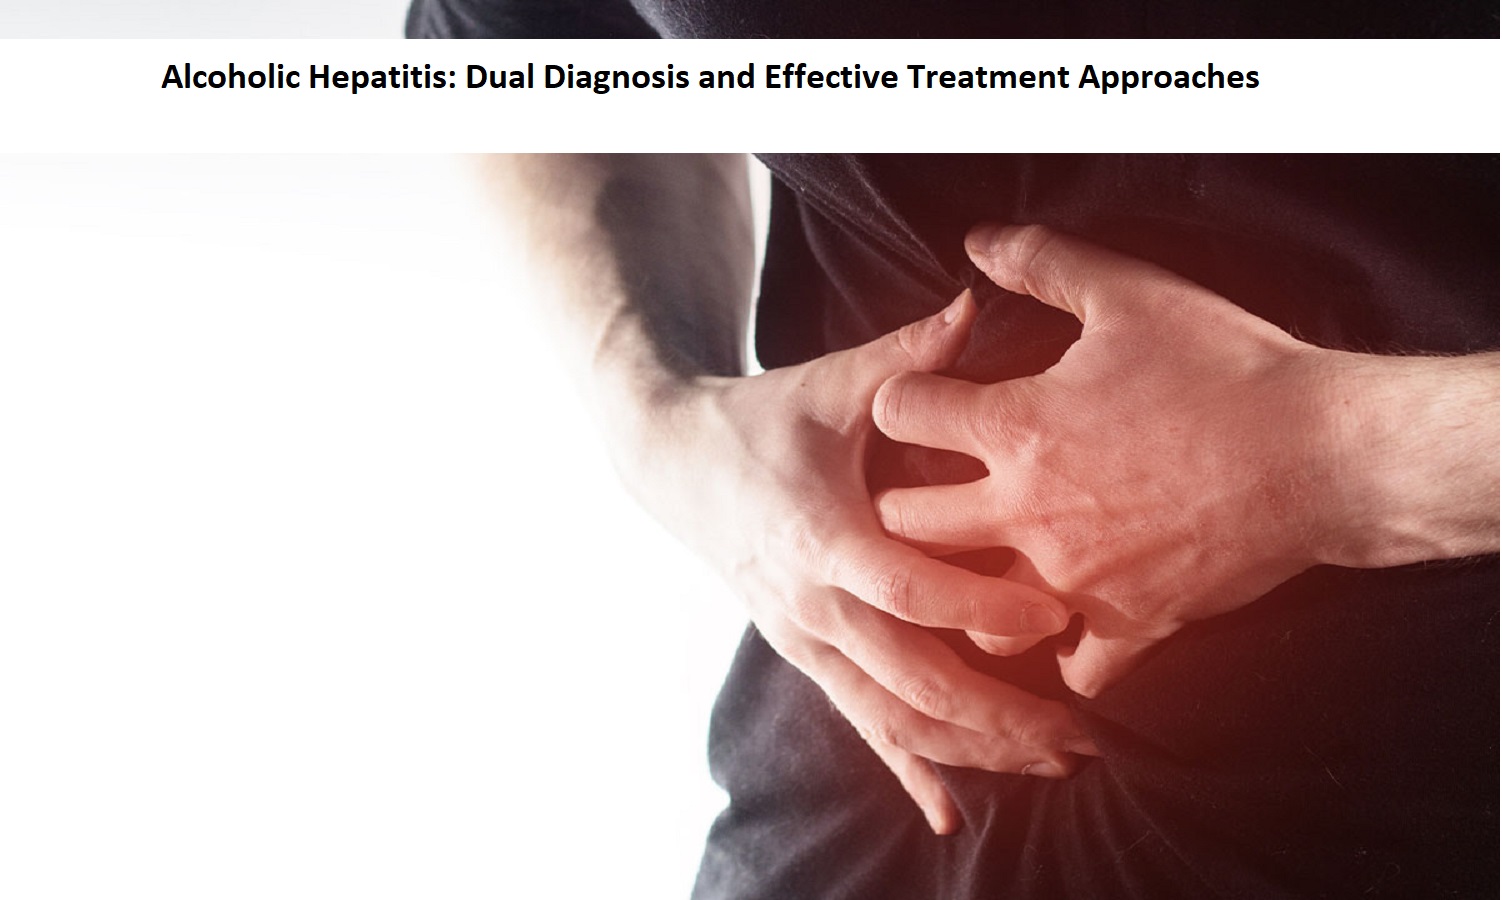 Alcoholic Hepatitis: Dual Diagnosis and Effective Treatment Approaches